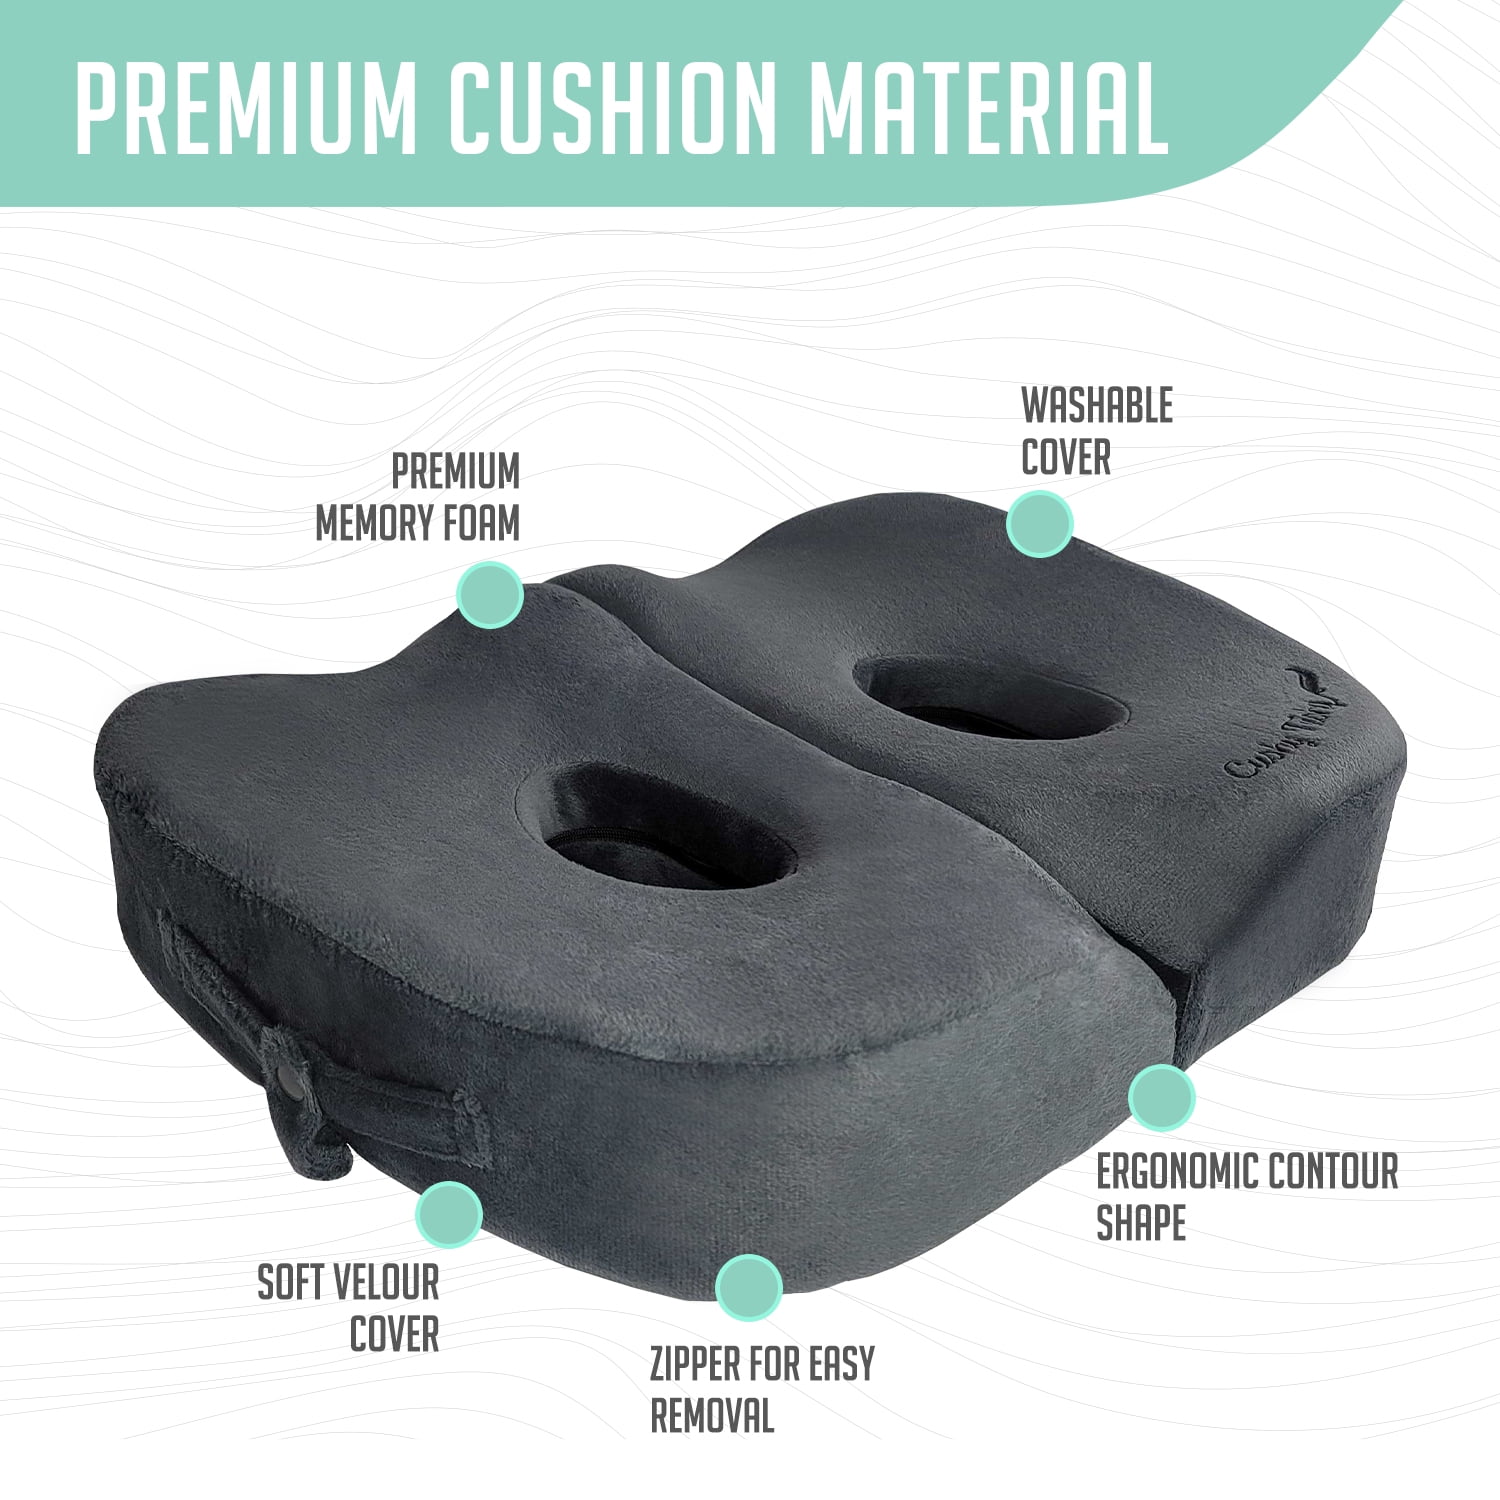 Sit Comfortable While Working with Cush Comfort Memory Foam Seat